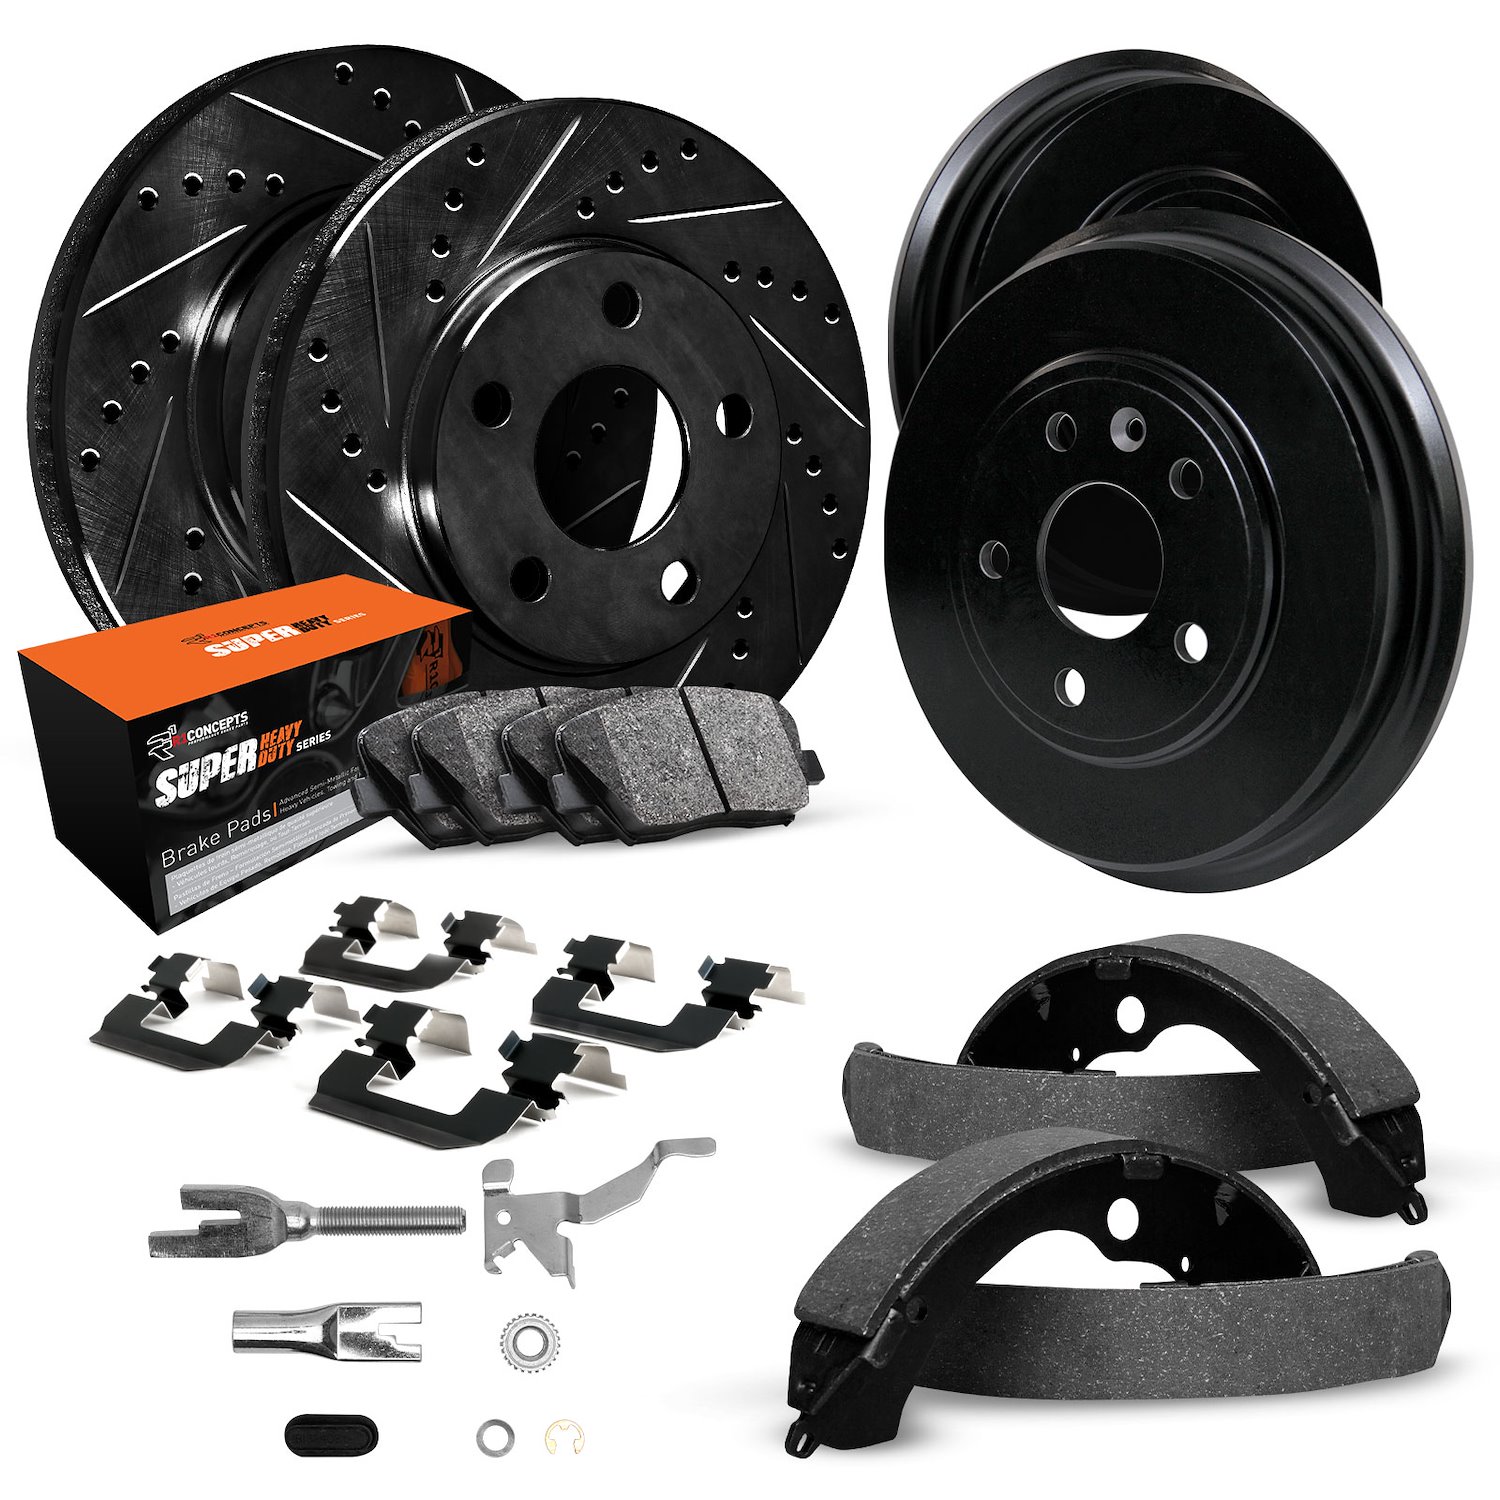 E-Line Drilled/Slotted Black Rotor & Drum Set w/Super-Duty Pads, Shoes, Hardware/Adjusters, 1974-1979 Ford/Lincoln/Mercury/Mazda